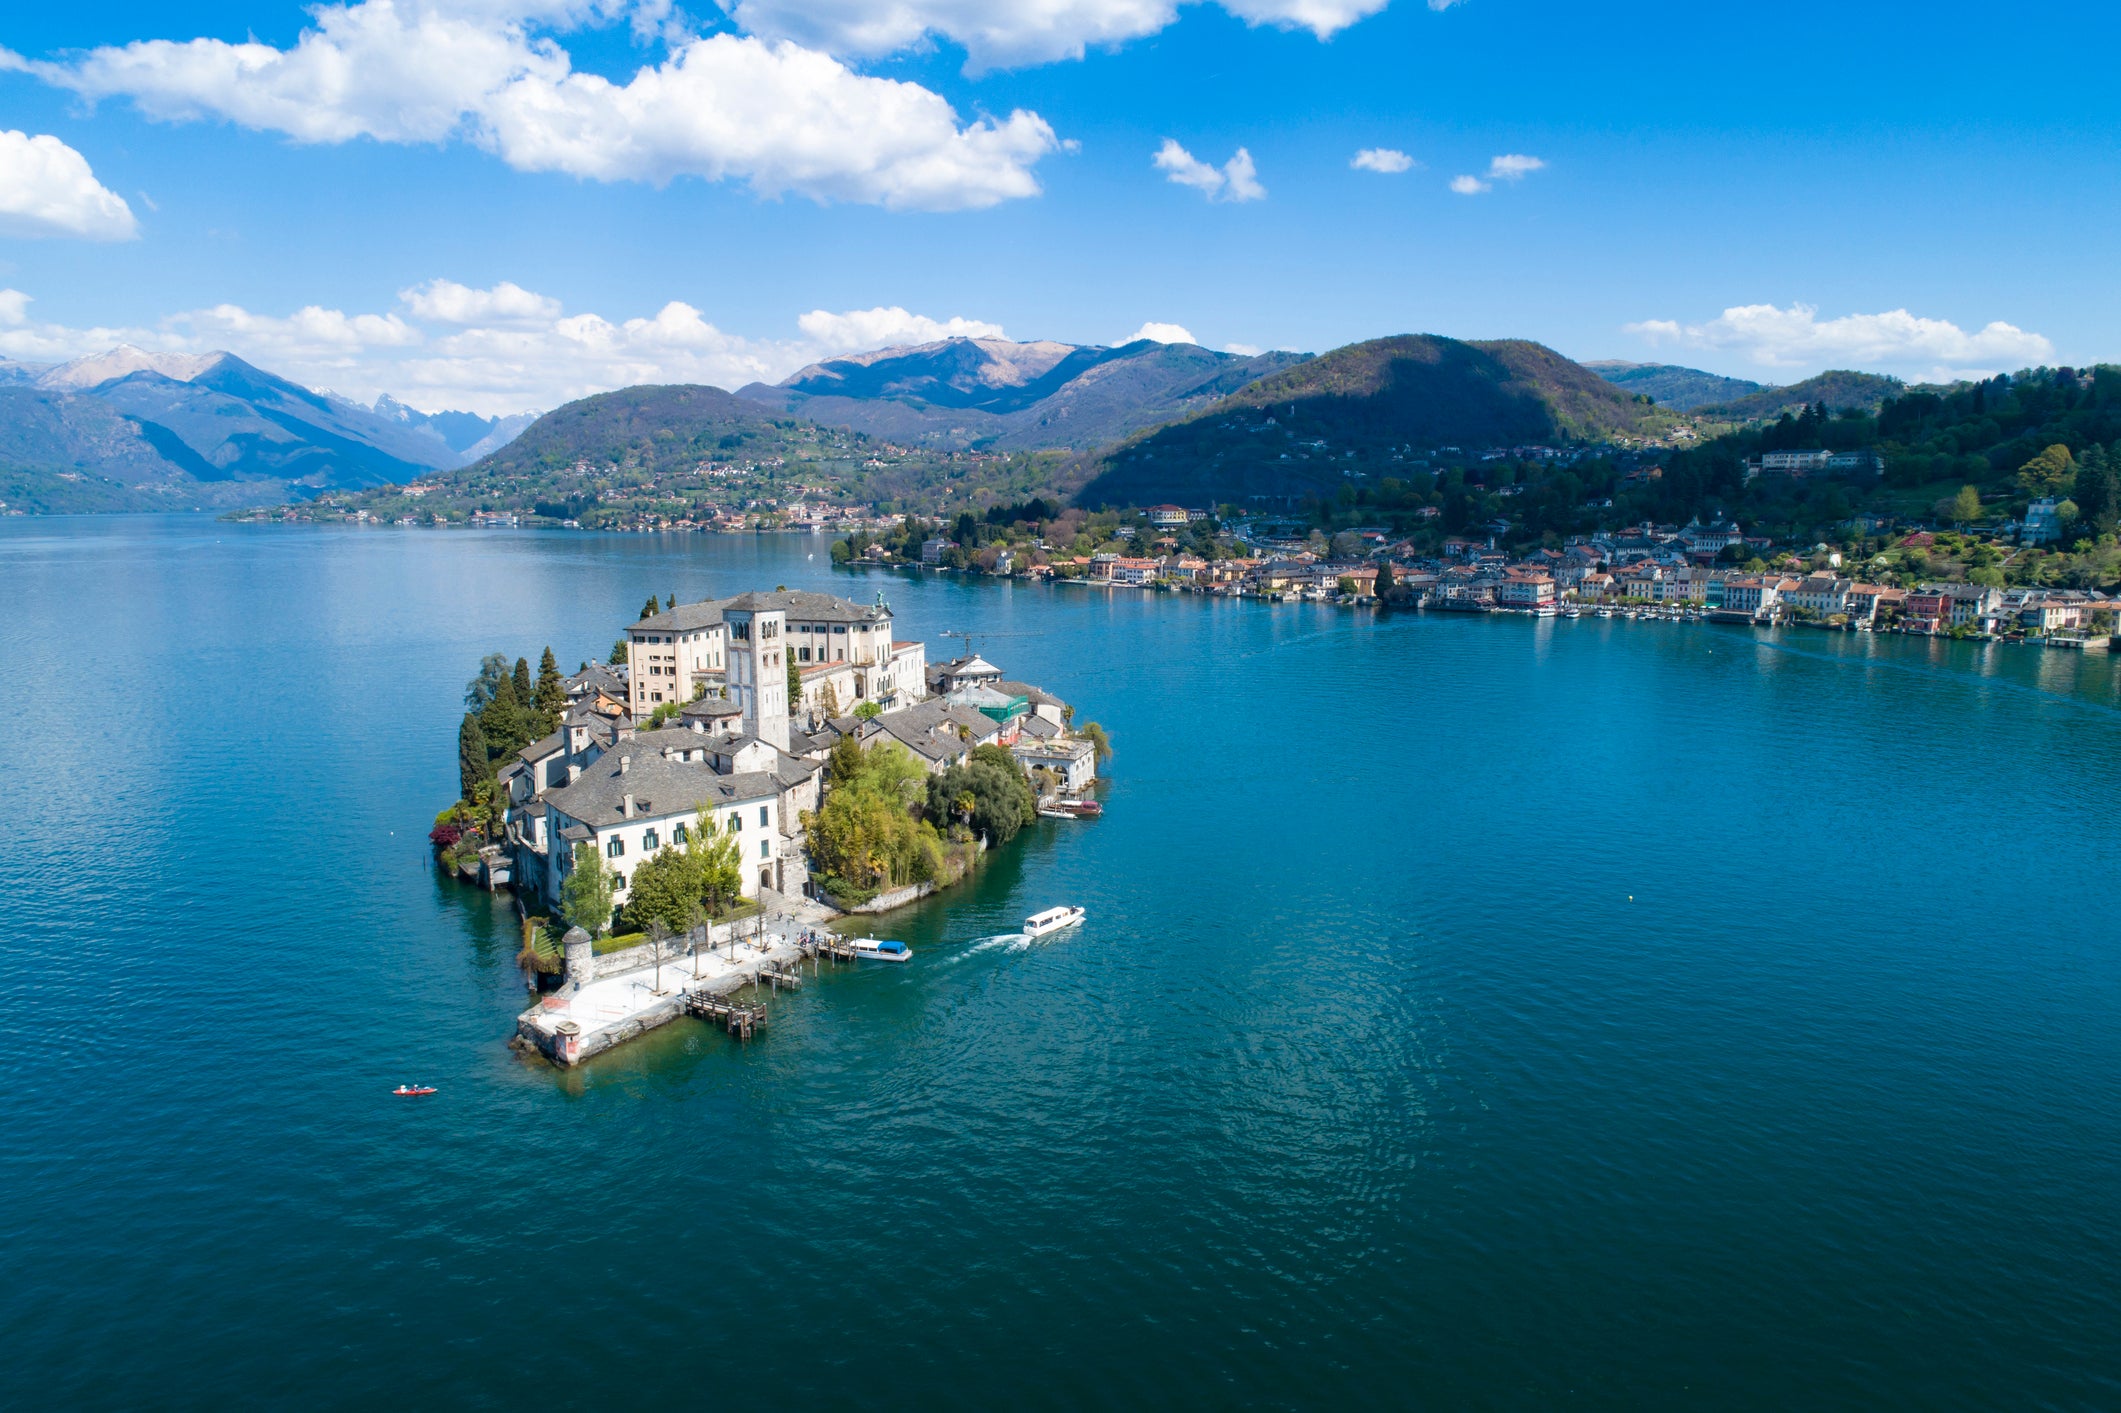 Leave the crowded shores of Garda and Como for Lake Orta